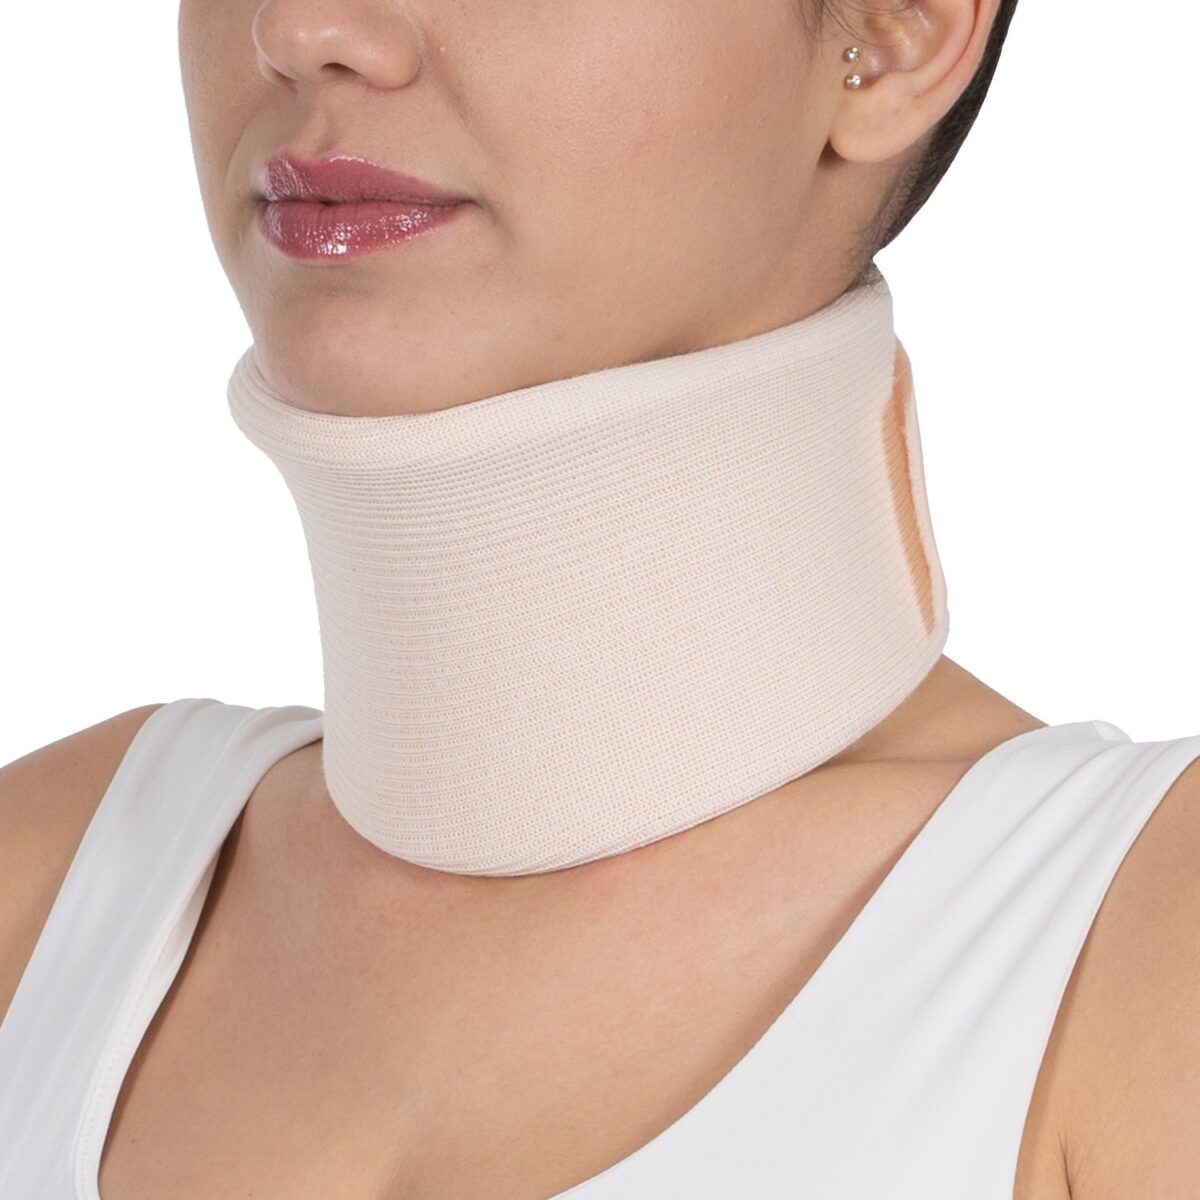 wingmed orthopedic equipments W104 nelson collar fabric coated product 5 1